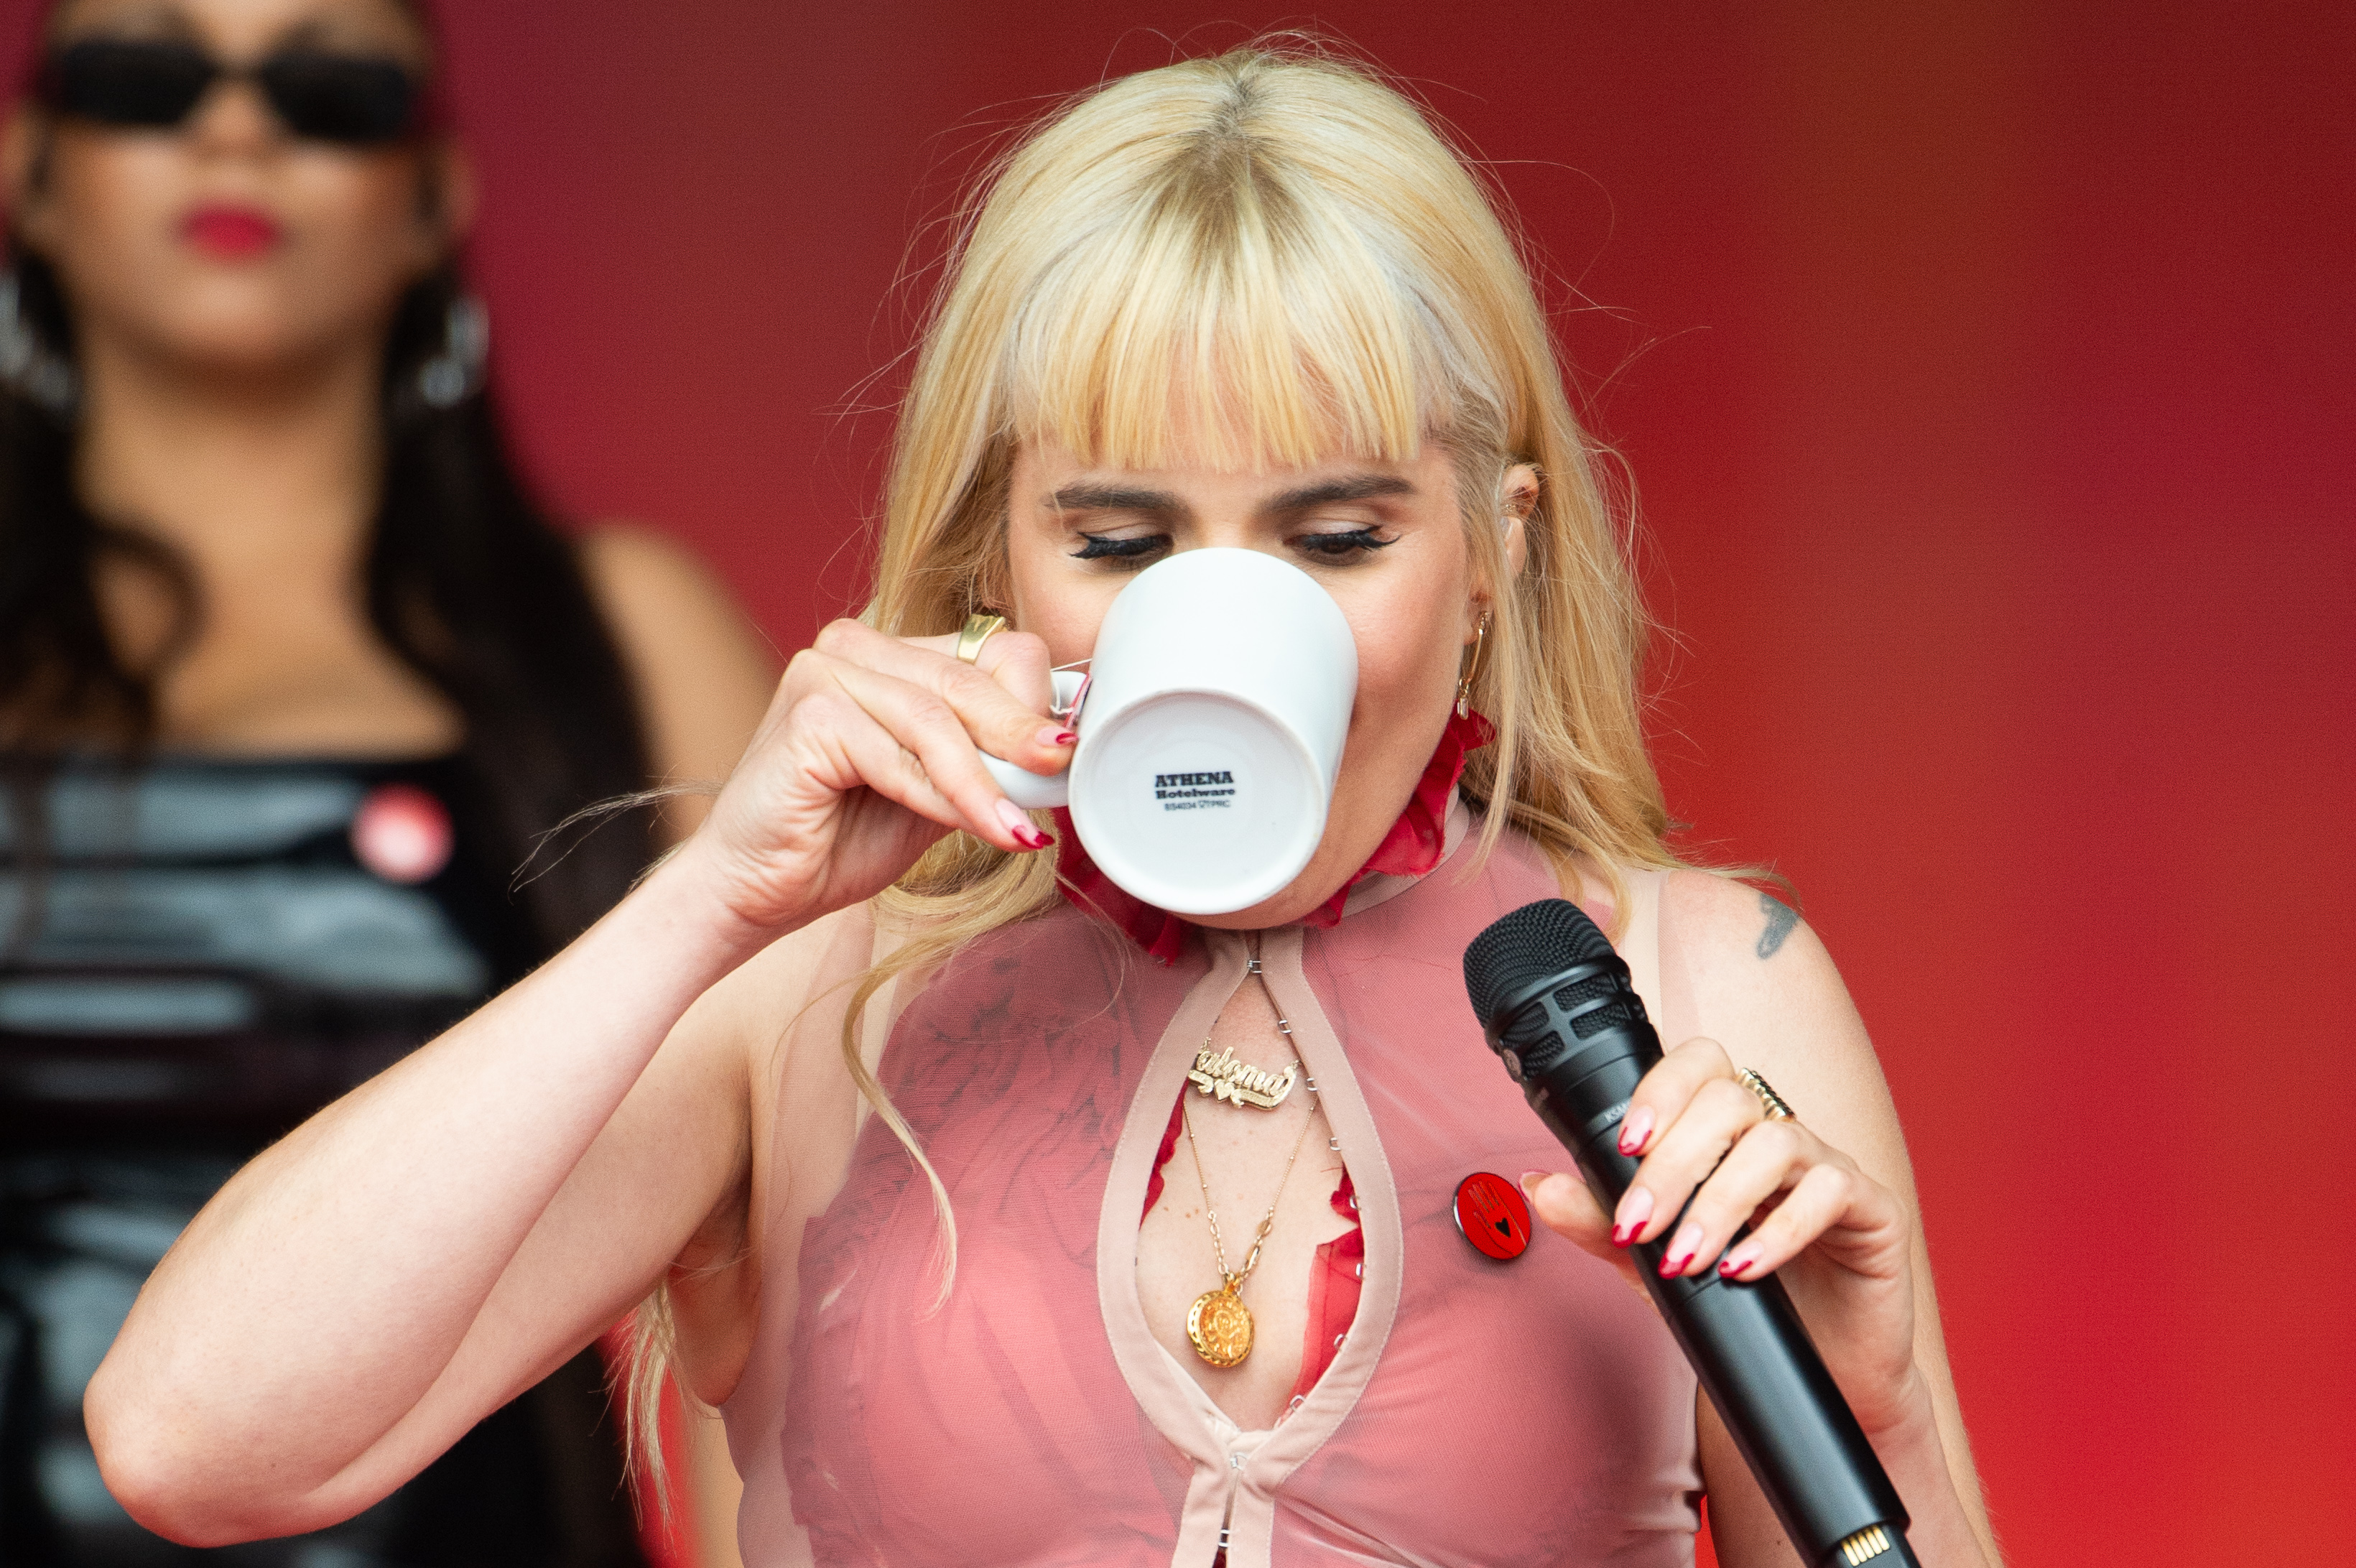 Paloma Faith made a rallying cry for women everywhere when she performed on the Pyramid Stage